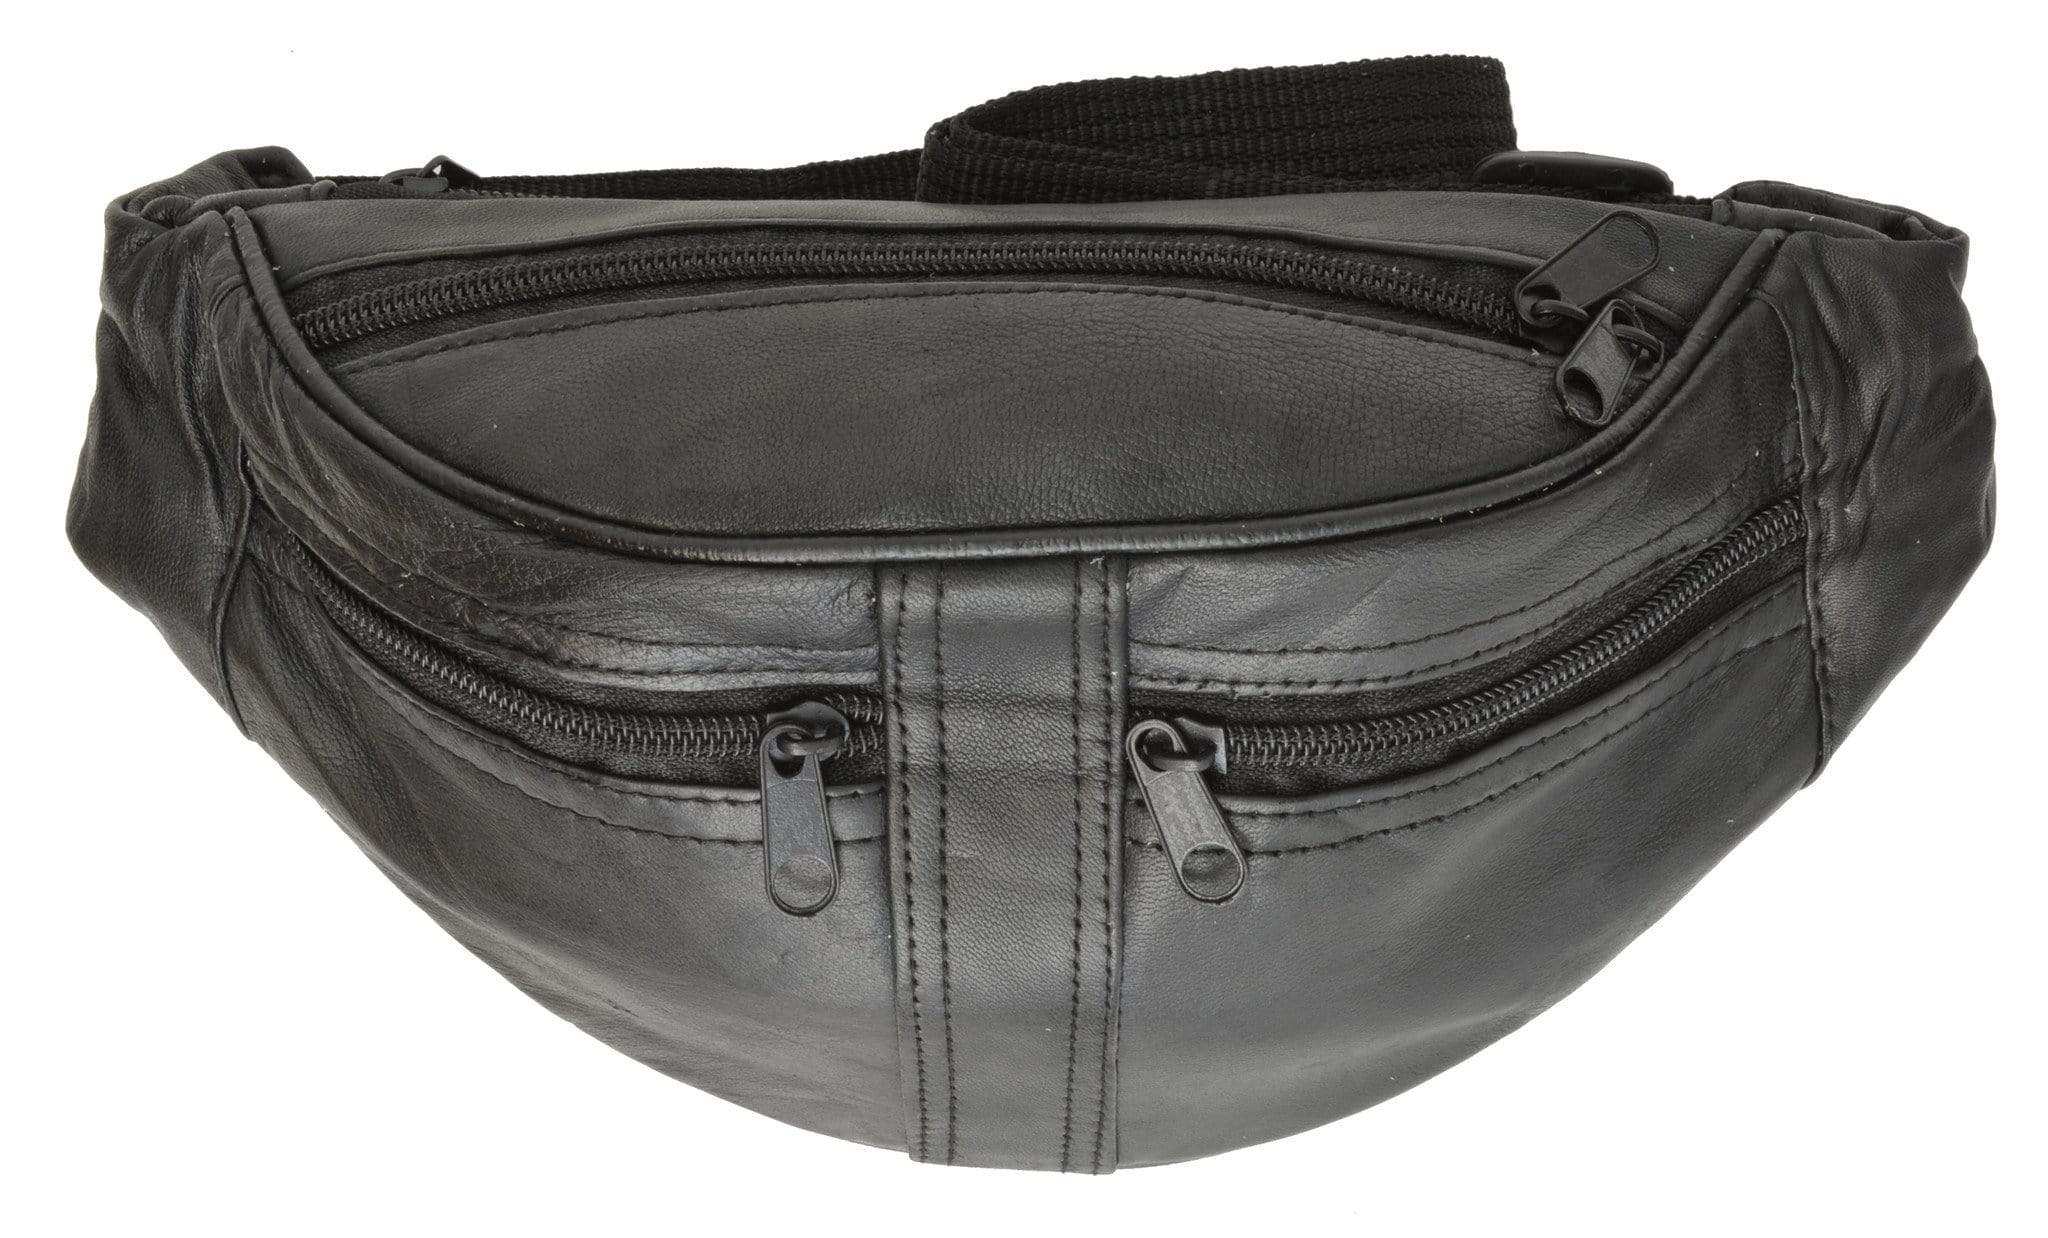 Leather Fanny Pack | Leather Fanny Packs, Waist Bags & Belt Bags - image 1 of 7